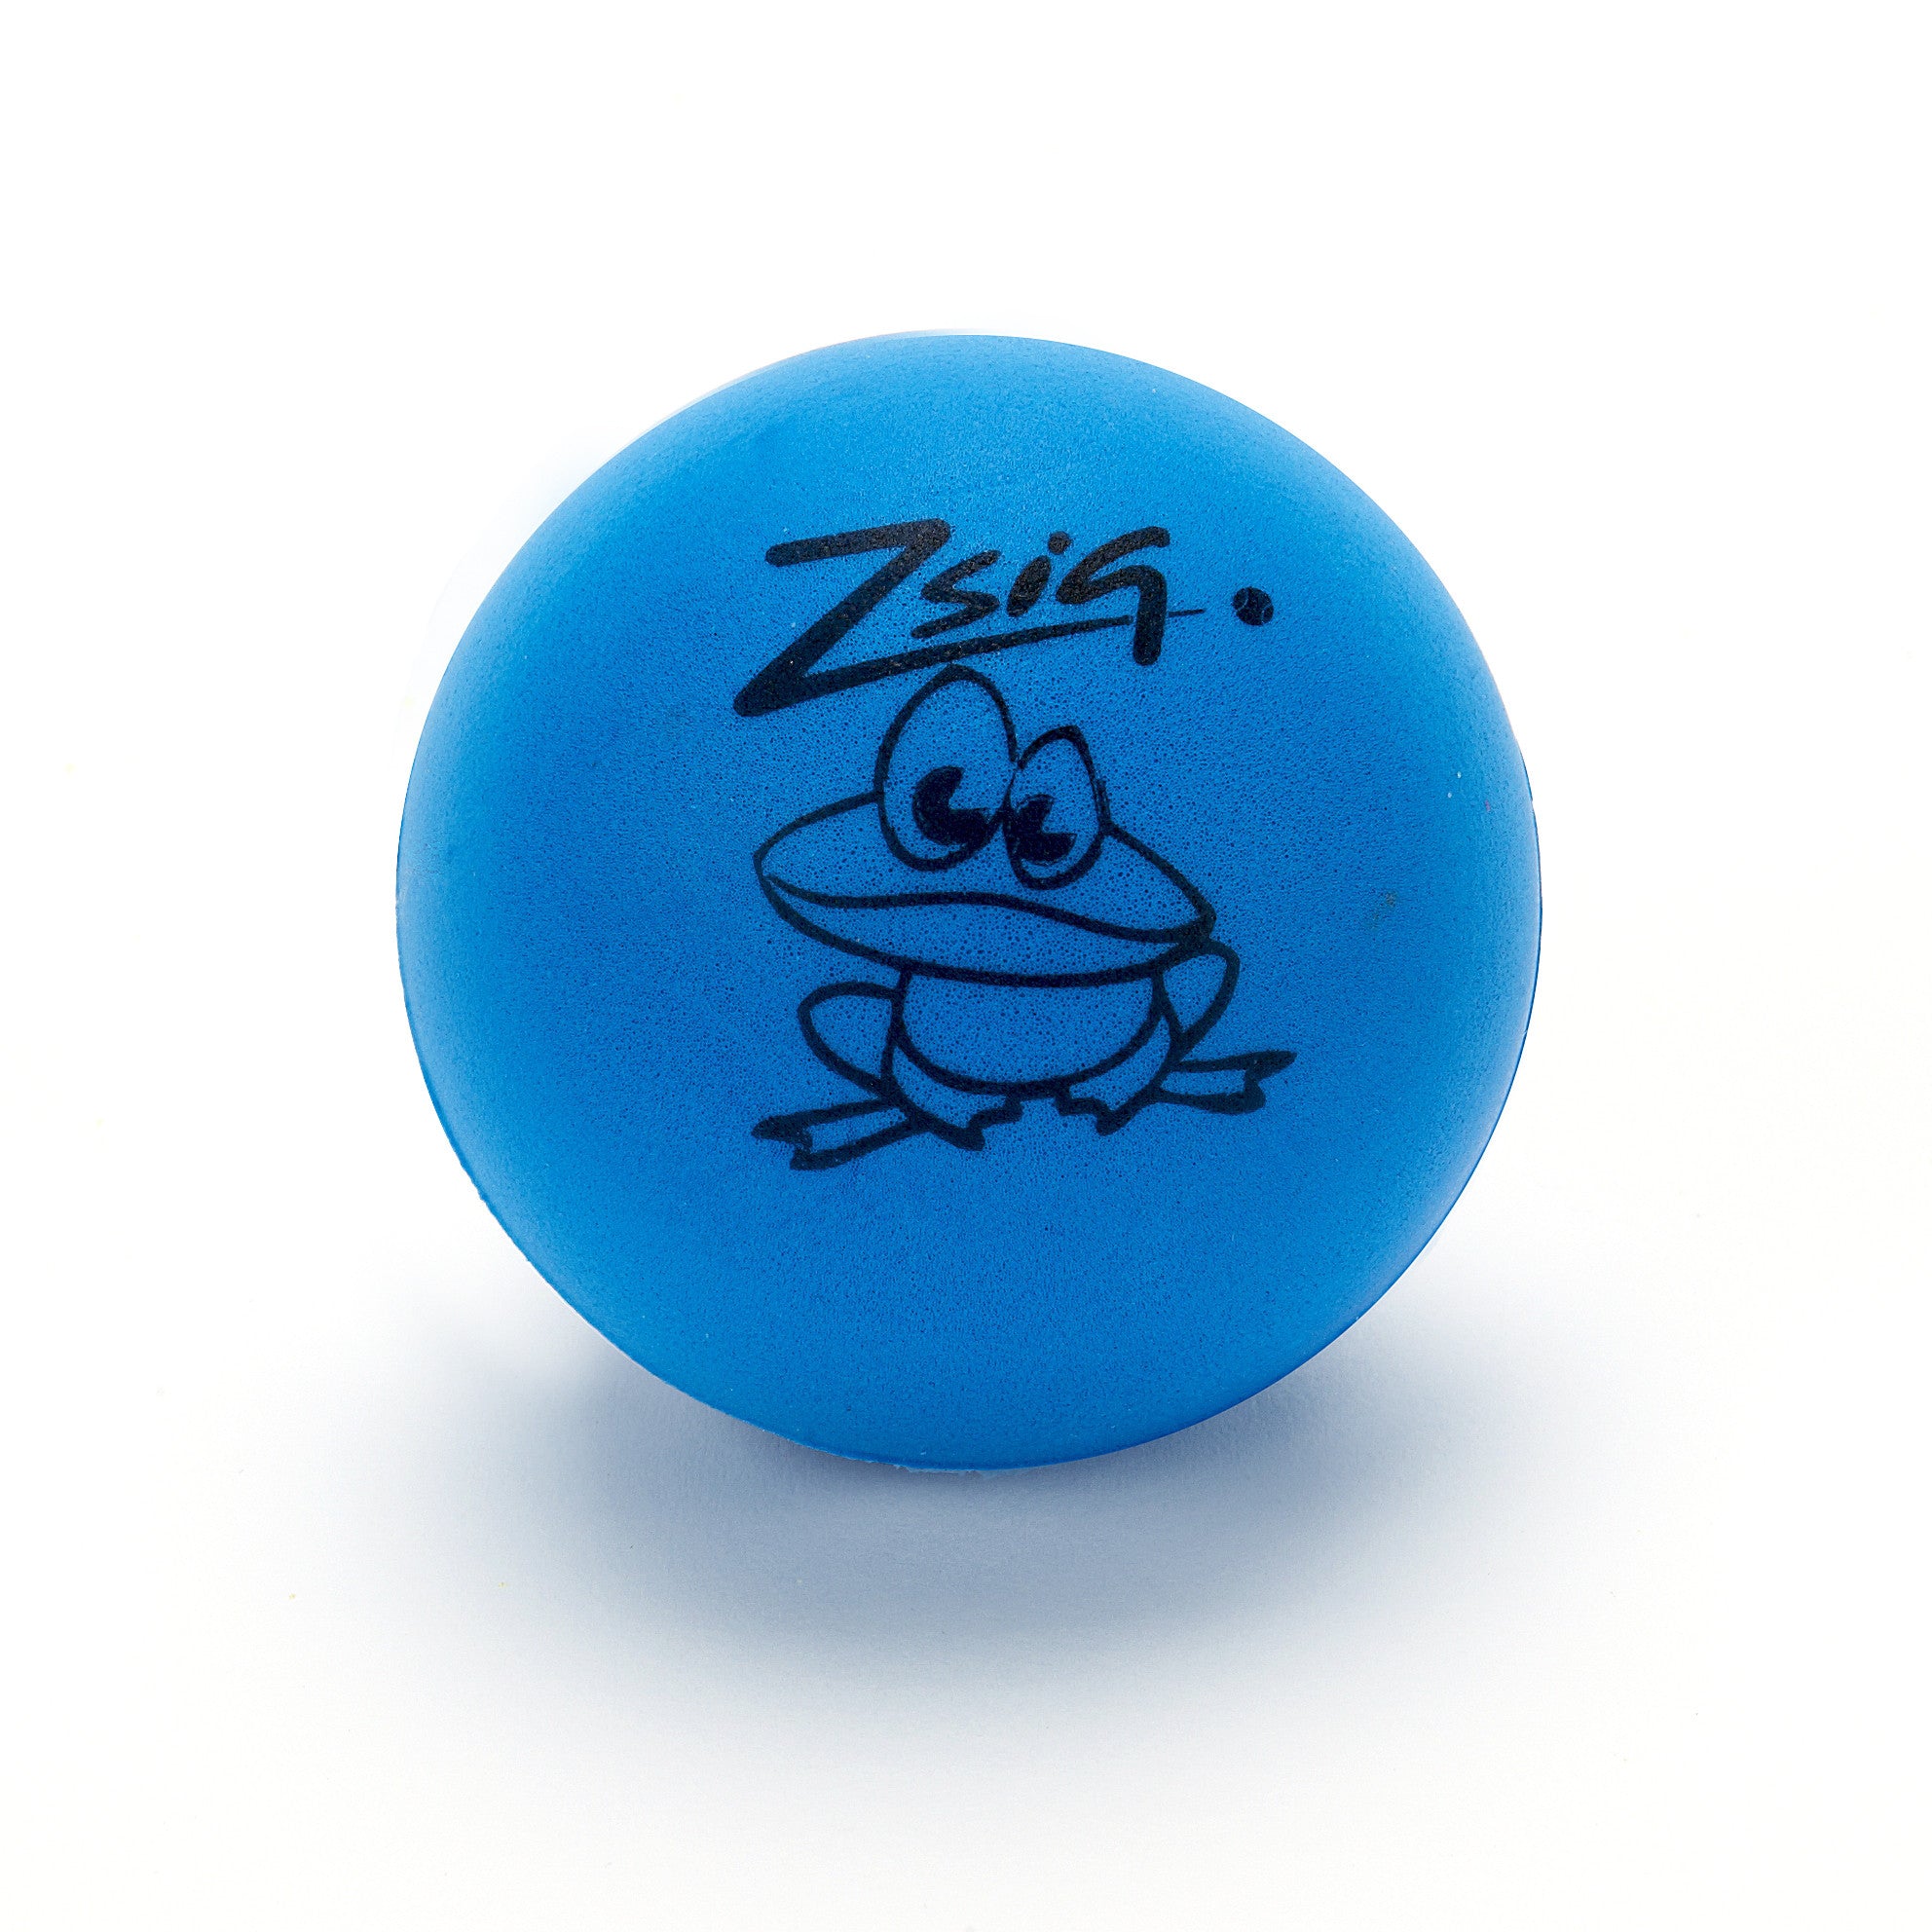 Early years ball Little Frog called George - blue ball